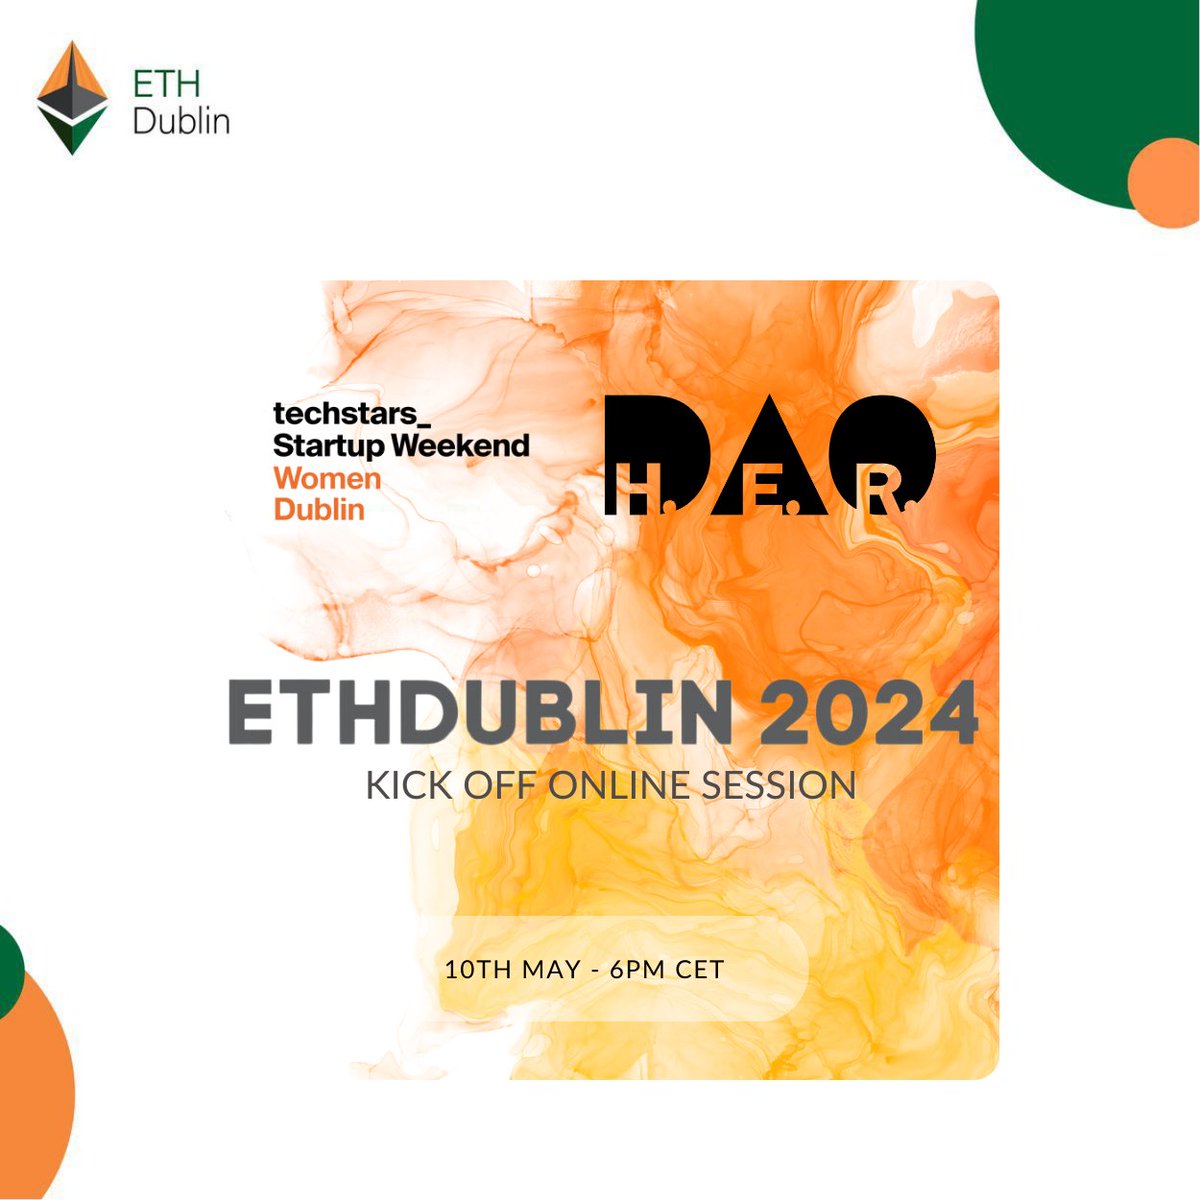 Join us tomorrow, Friday, May 10th, at 6:00 PM GMT+2 for an online kick-off call with @StartupWeekend Women Dublin and @EthIreland ✨ It will be the perfect occasion to get prepared for ETHDublin, network, and meet the community 🇮🇪 Link to register: lu.ma/9fcrum7y